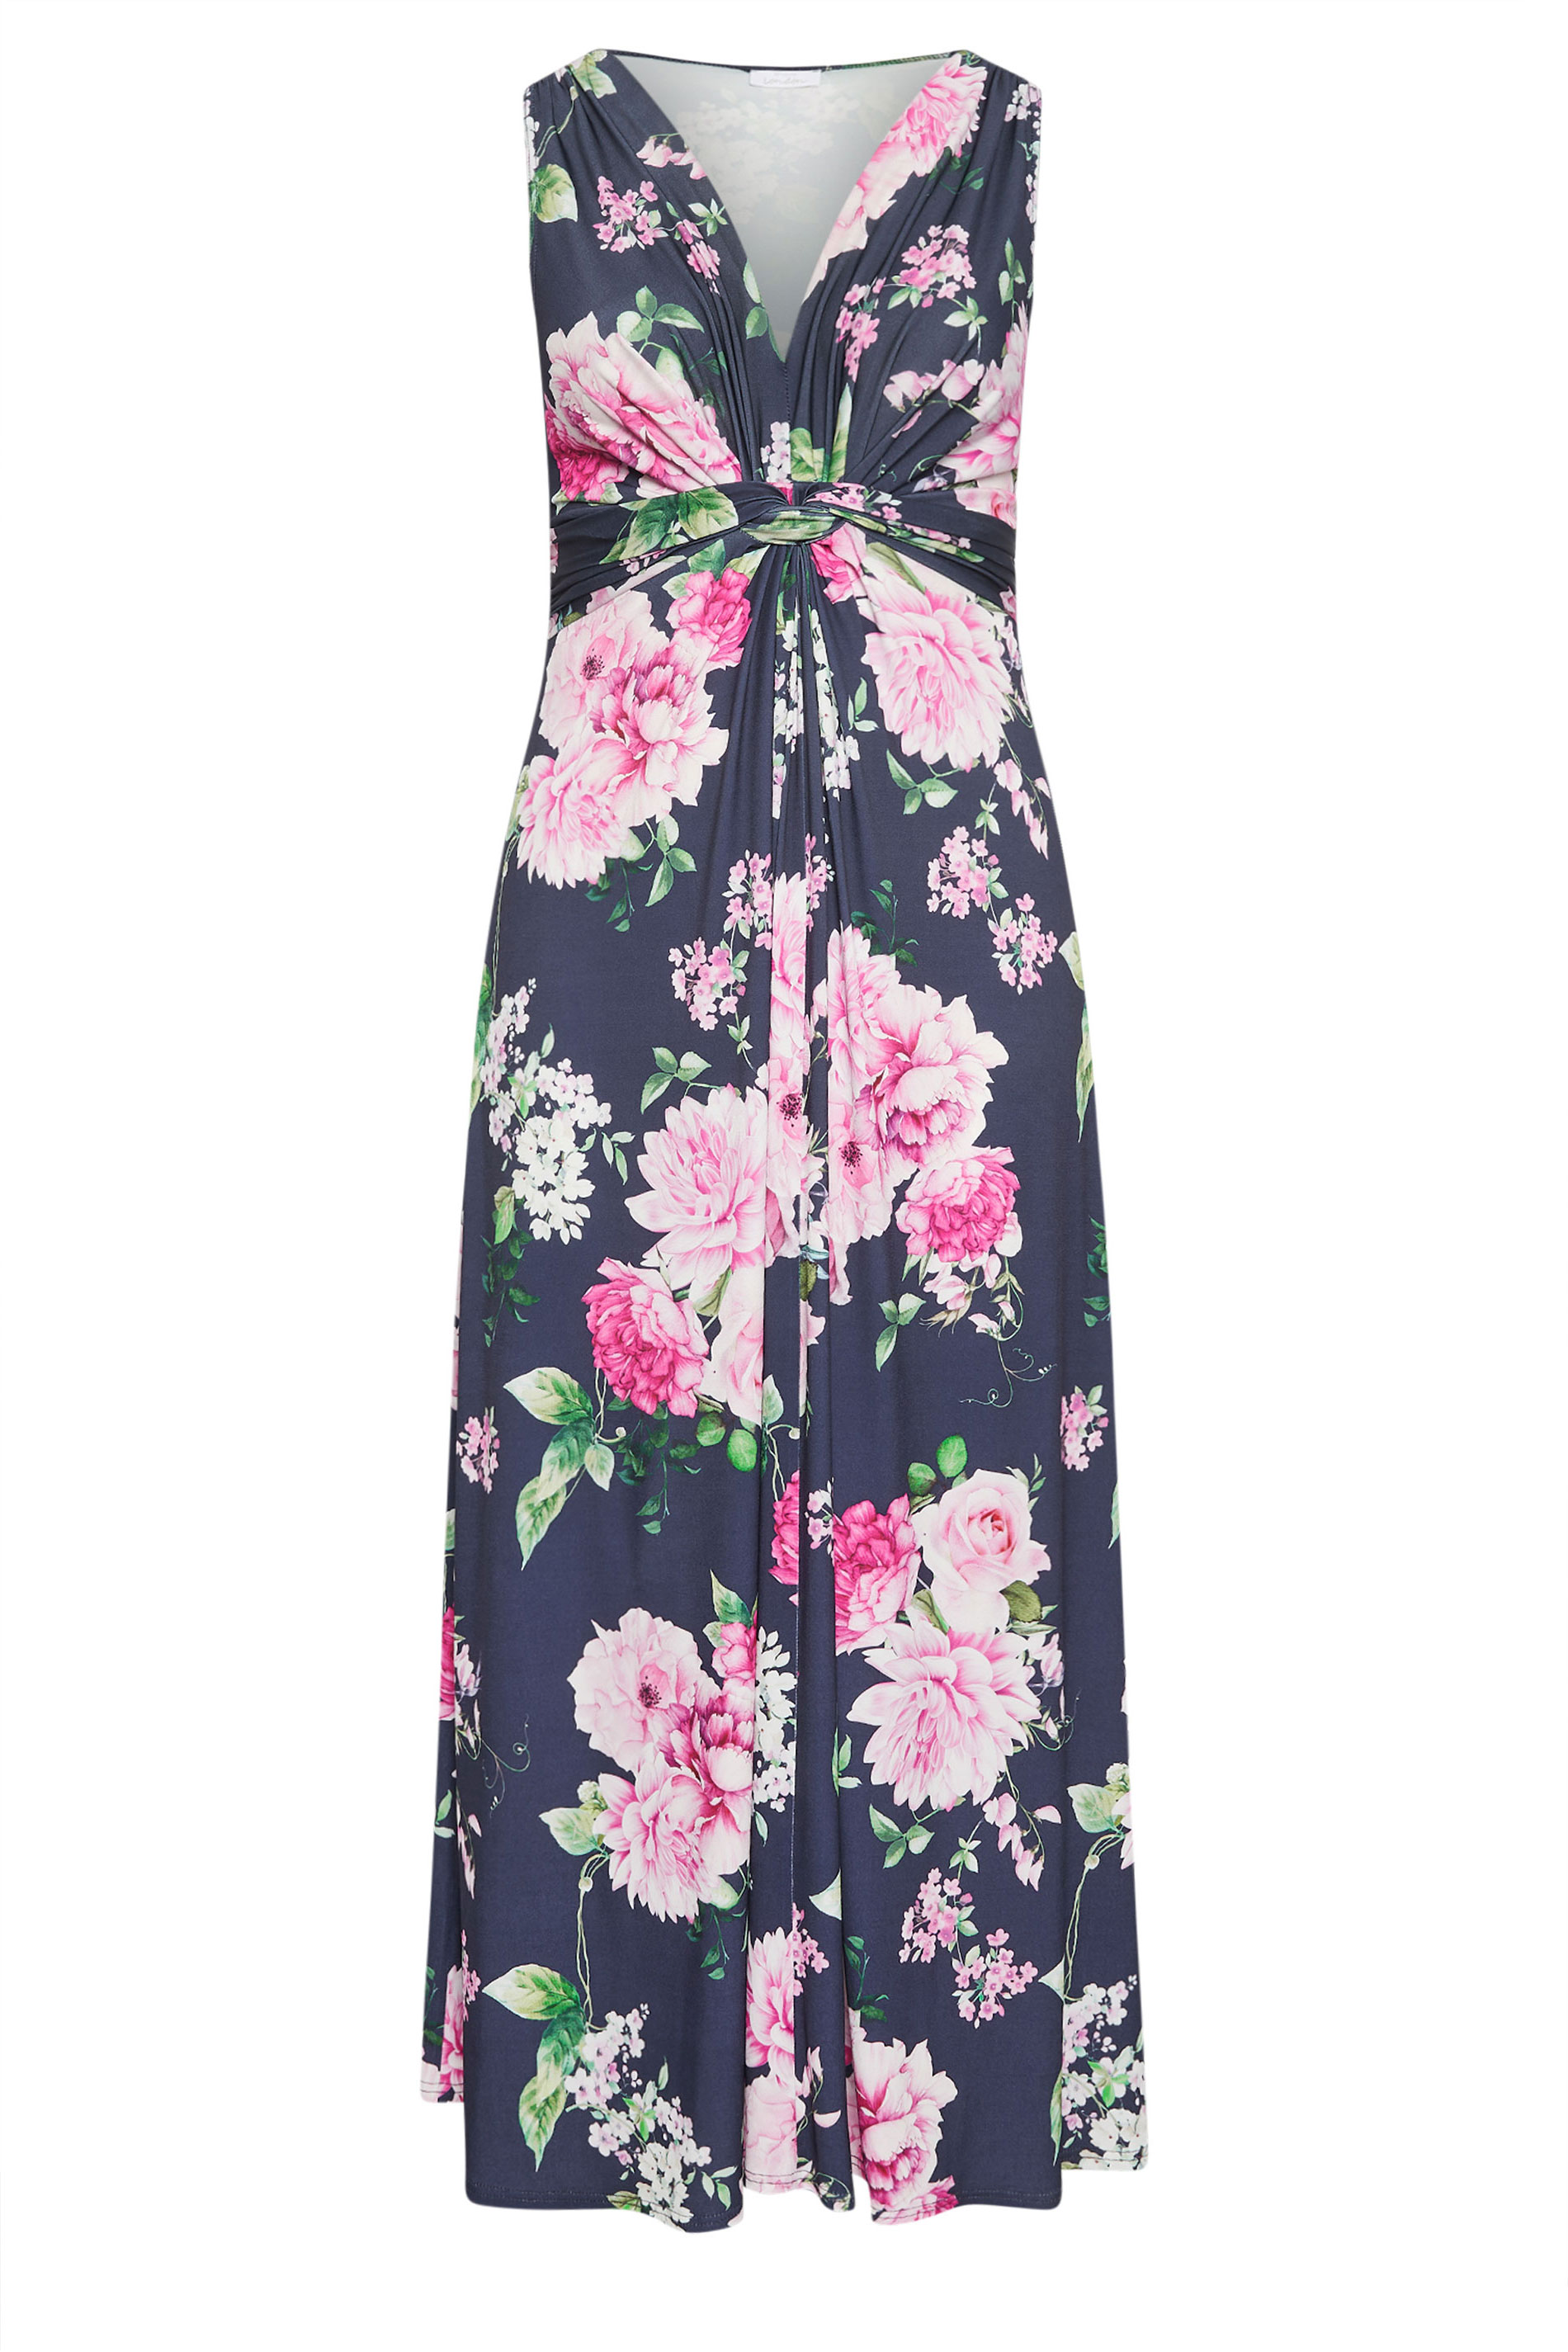 YOURS LONDON Plus Size Navy Blue Floral Print Knot Front Maxi Dress | Yours Clothing 2